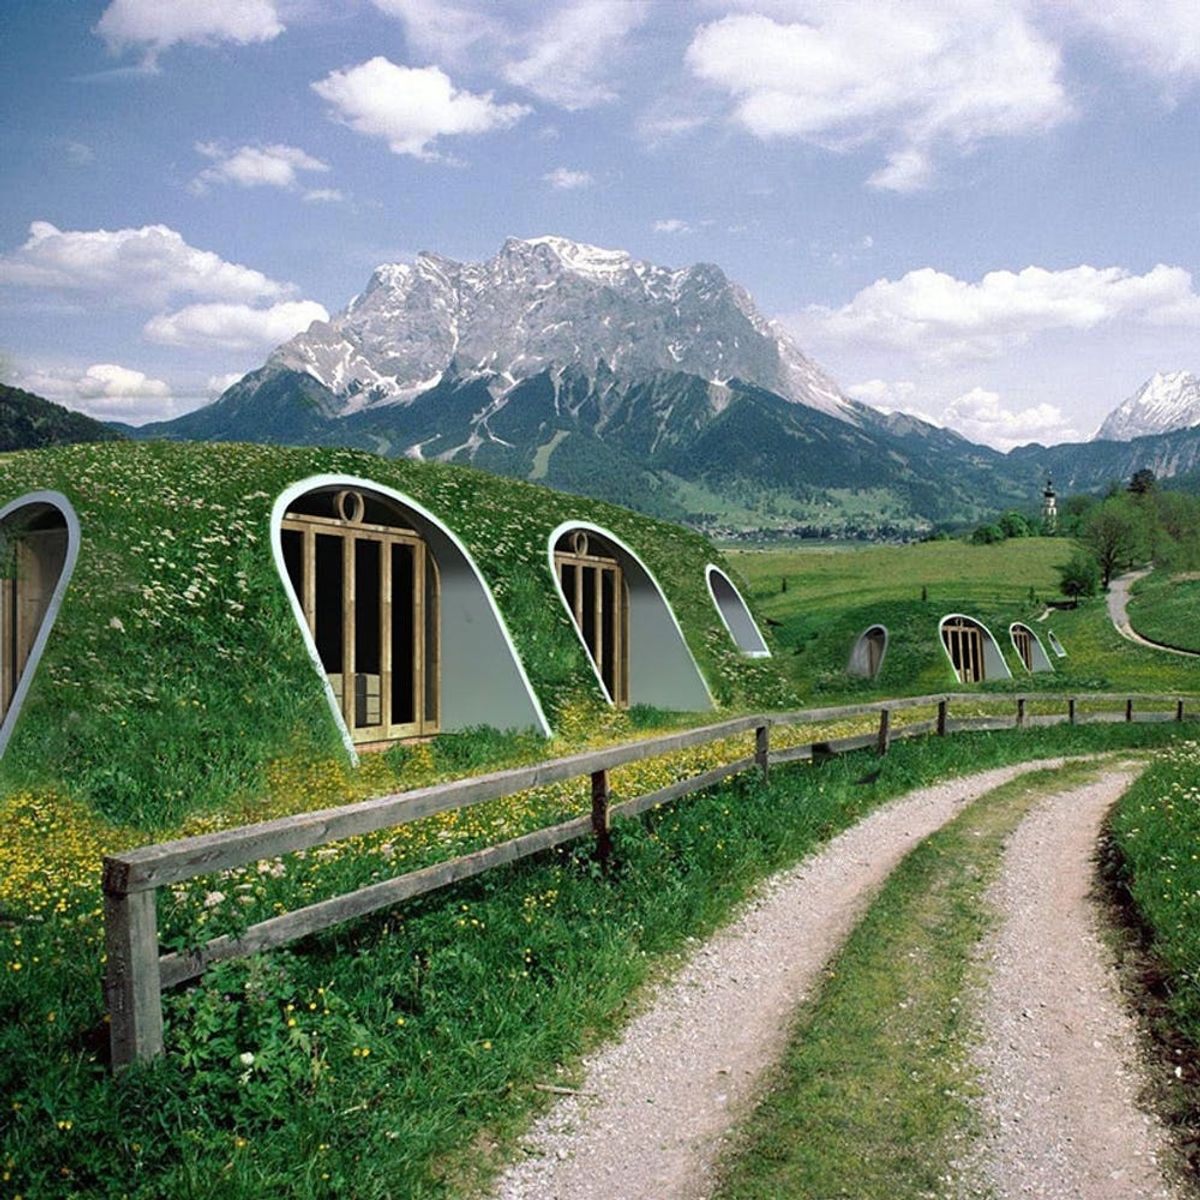 This Company Lets You DIY Your Very Own Hobbit House